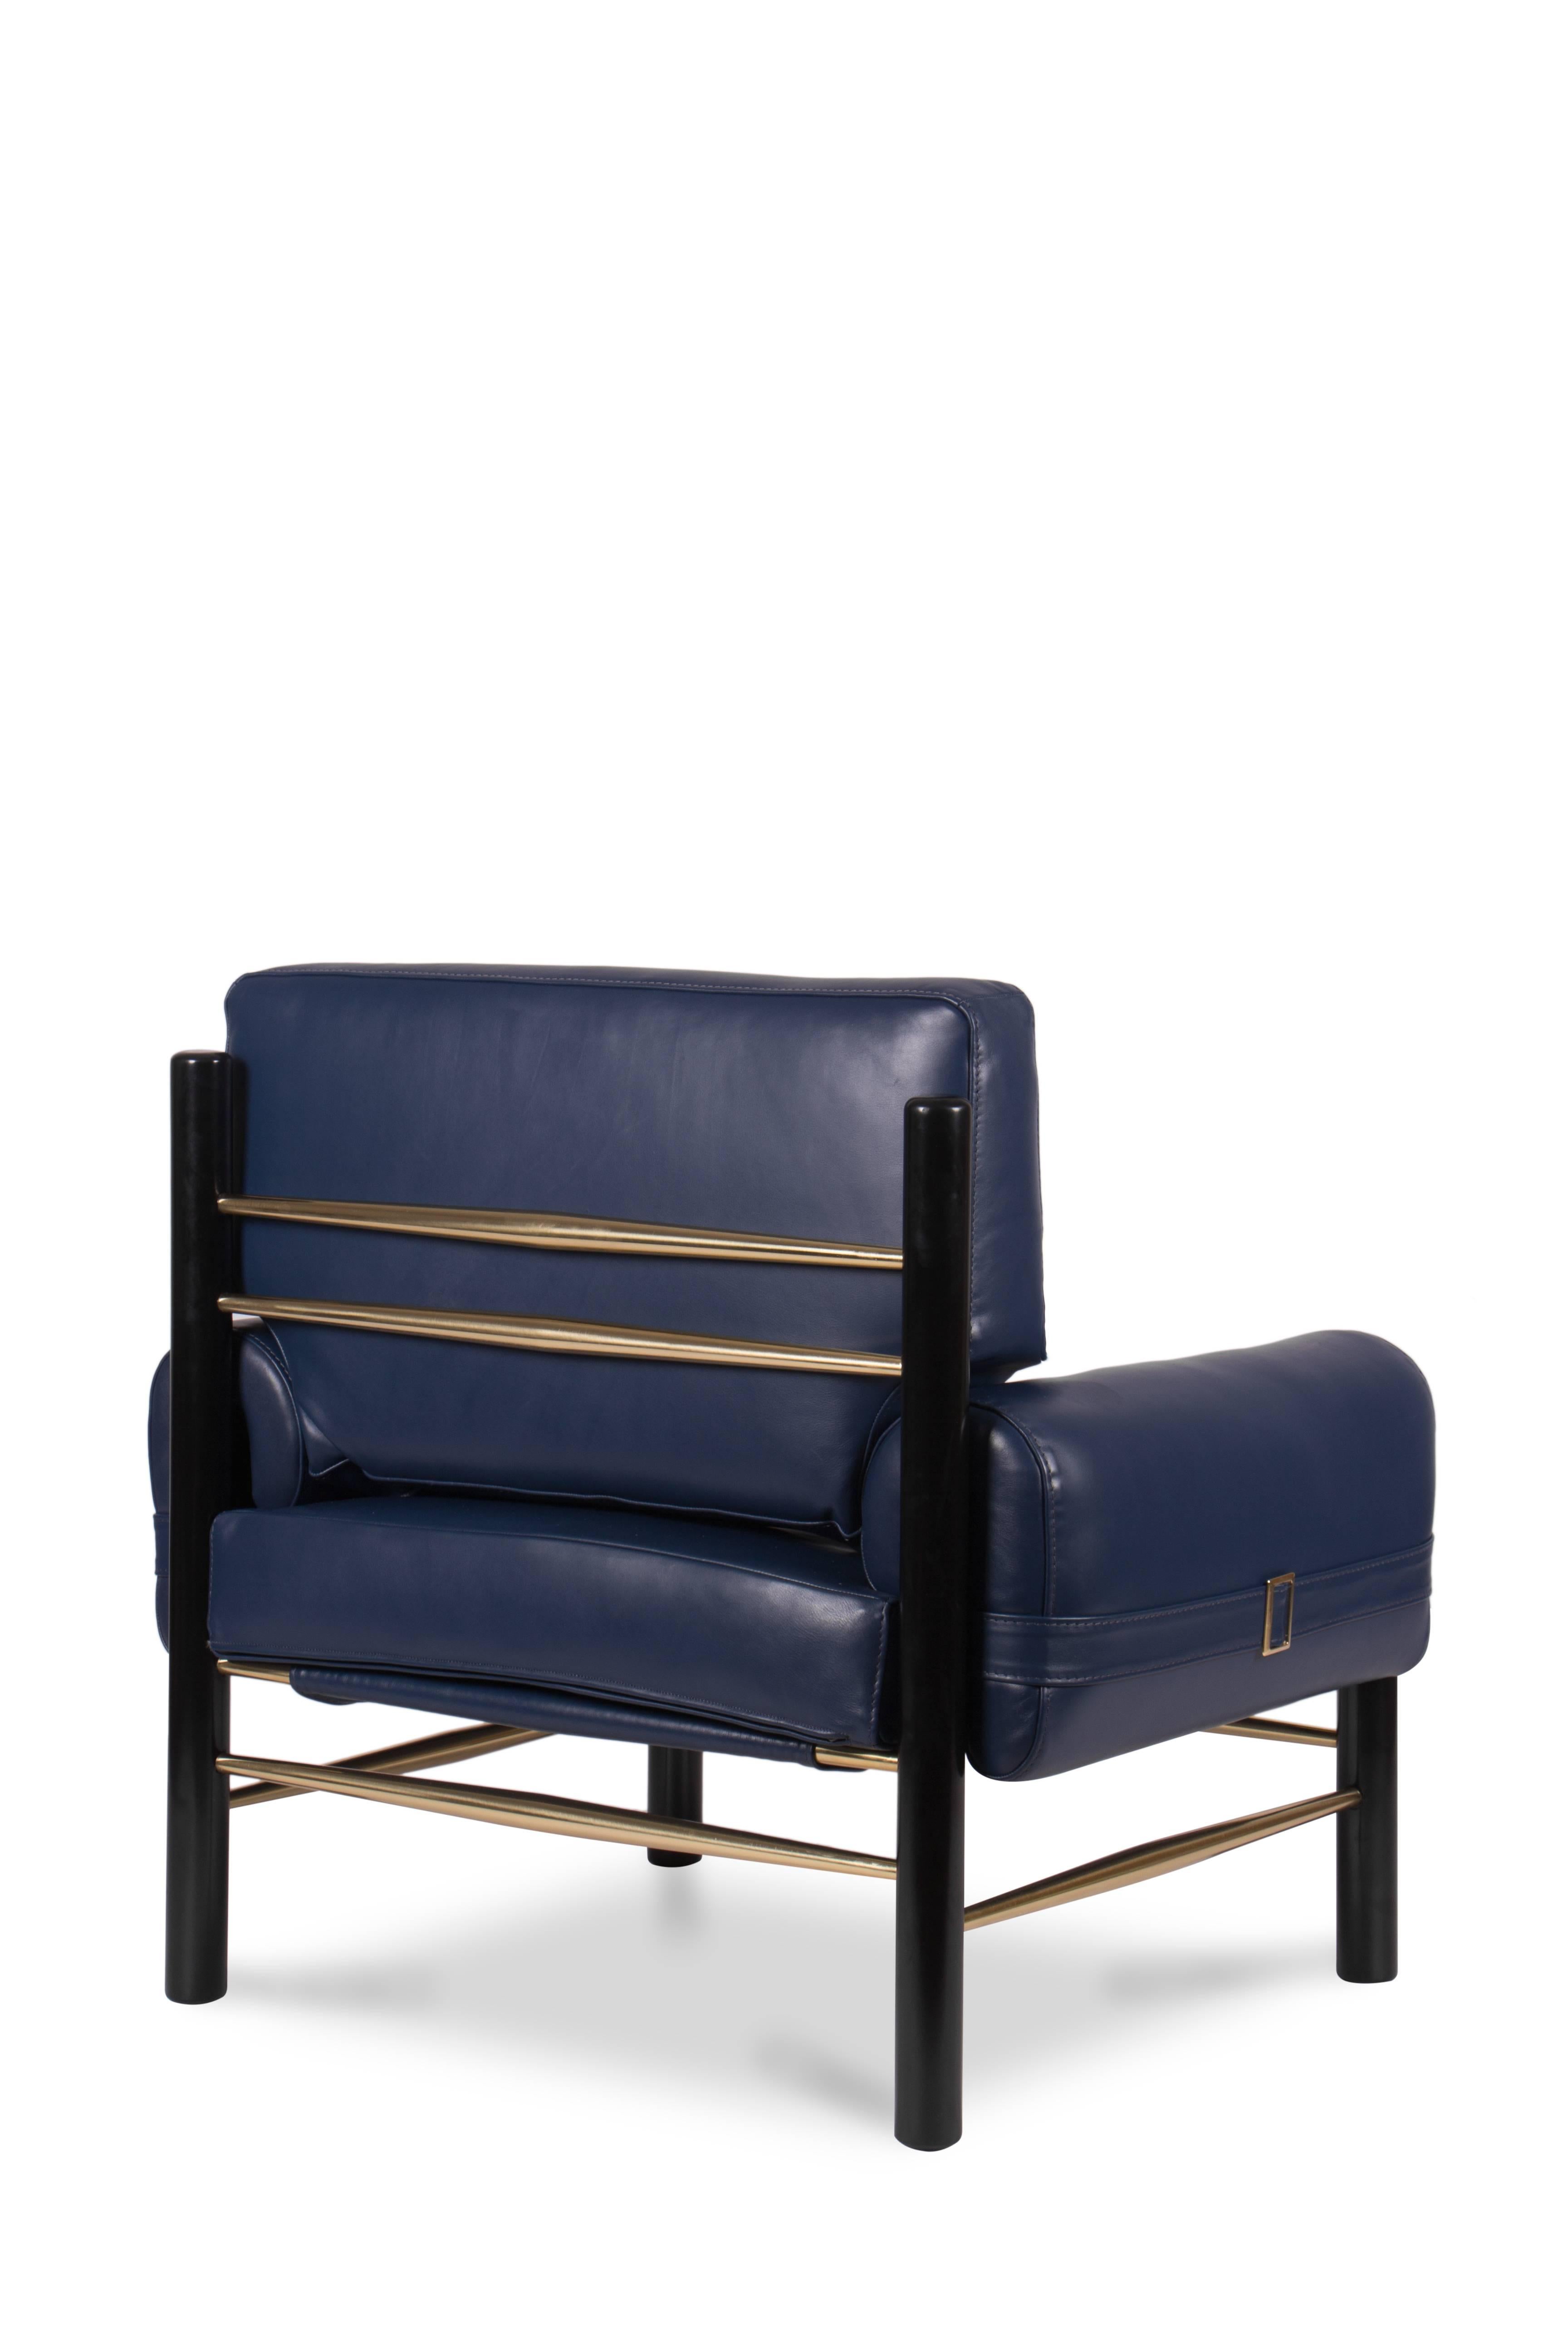 Mid-Century Modern-Style Leather, Wood and Brass Boxy Armchair In Excellent Condition For Sale In Sydney, NSW